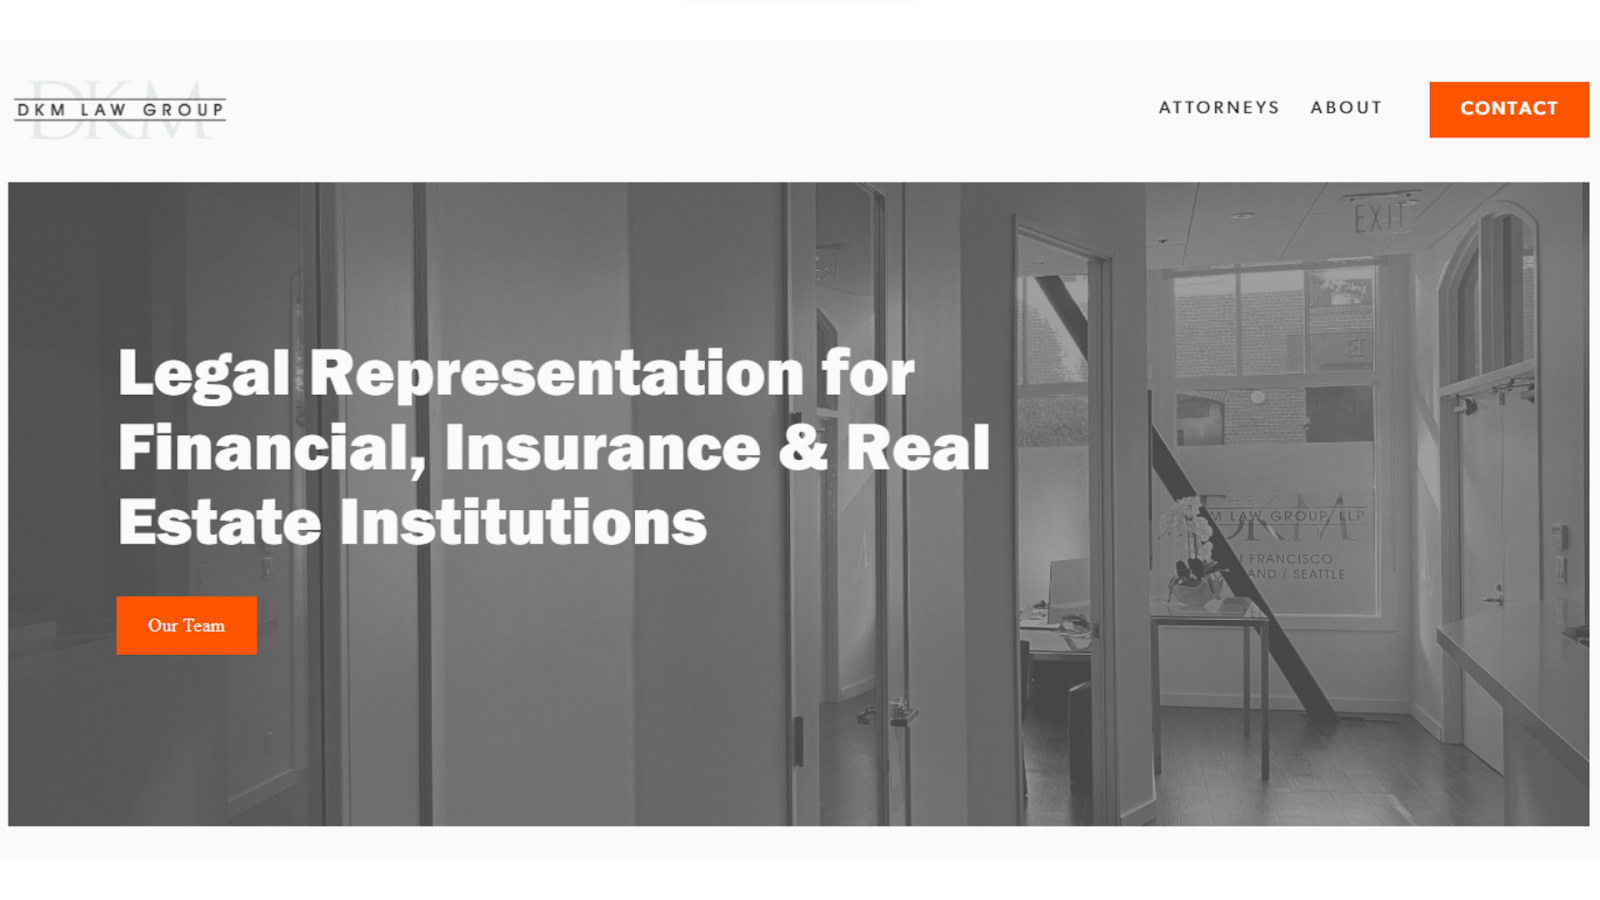 Screenshots from the DKM Law Group website made with Squarespace